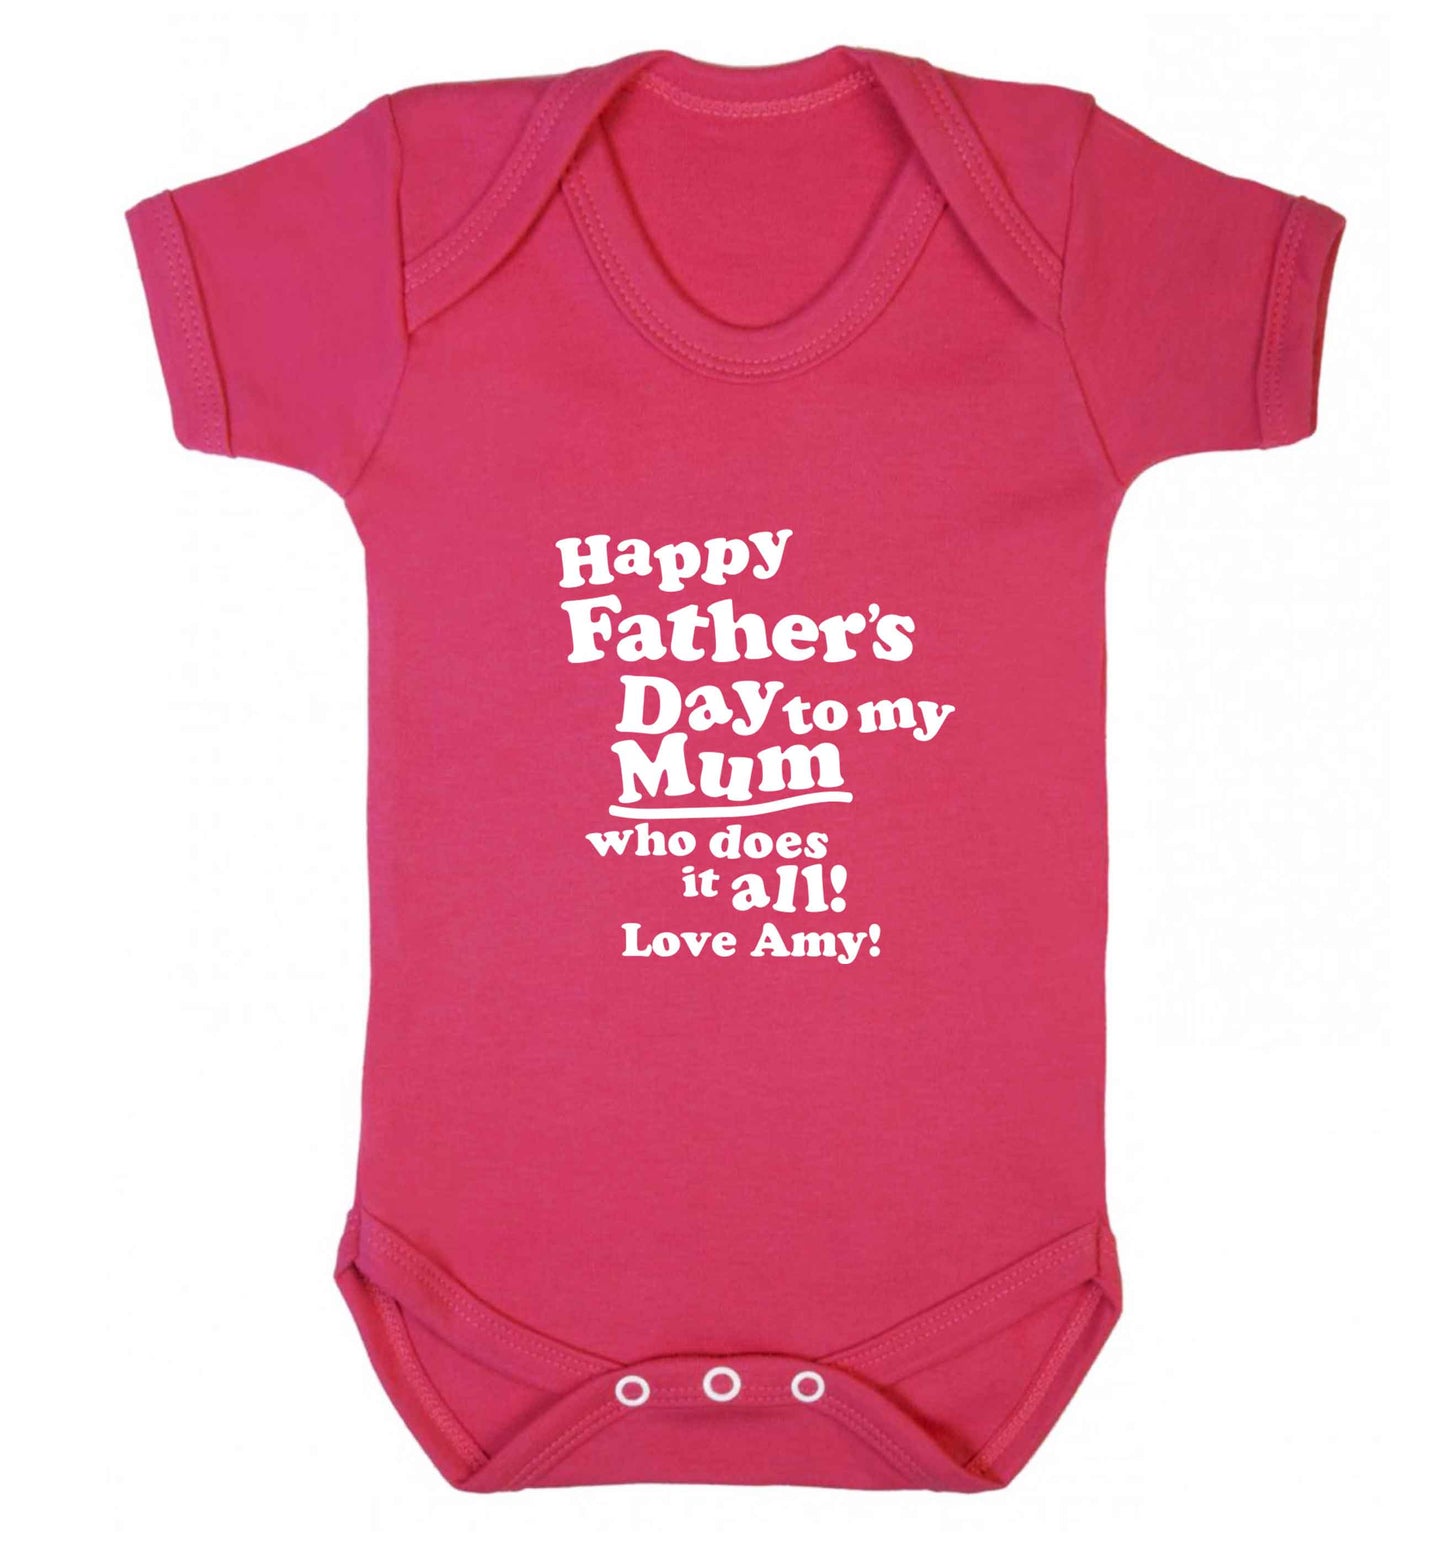 Happy Father's day to my mum who does it all baby vest dark pink 18-24 months